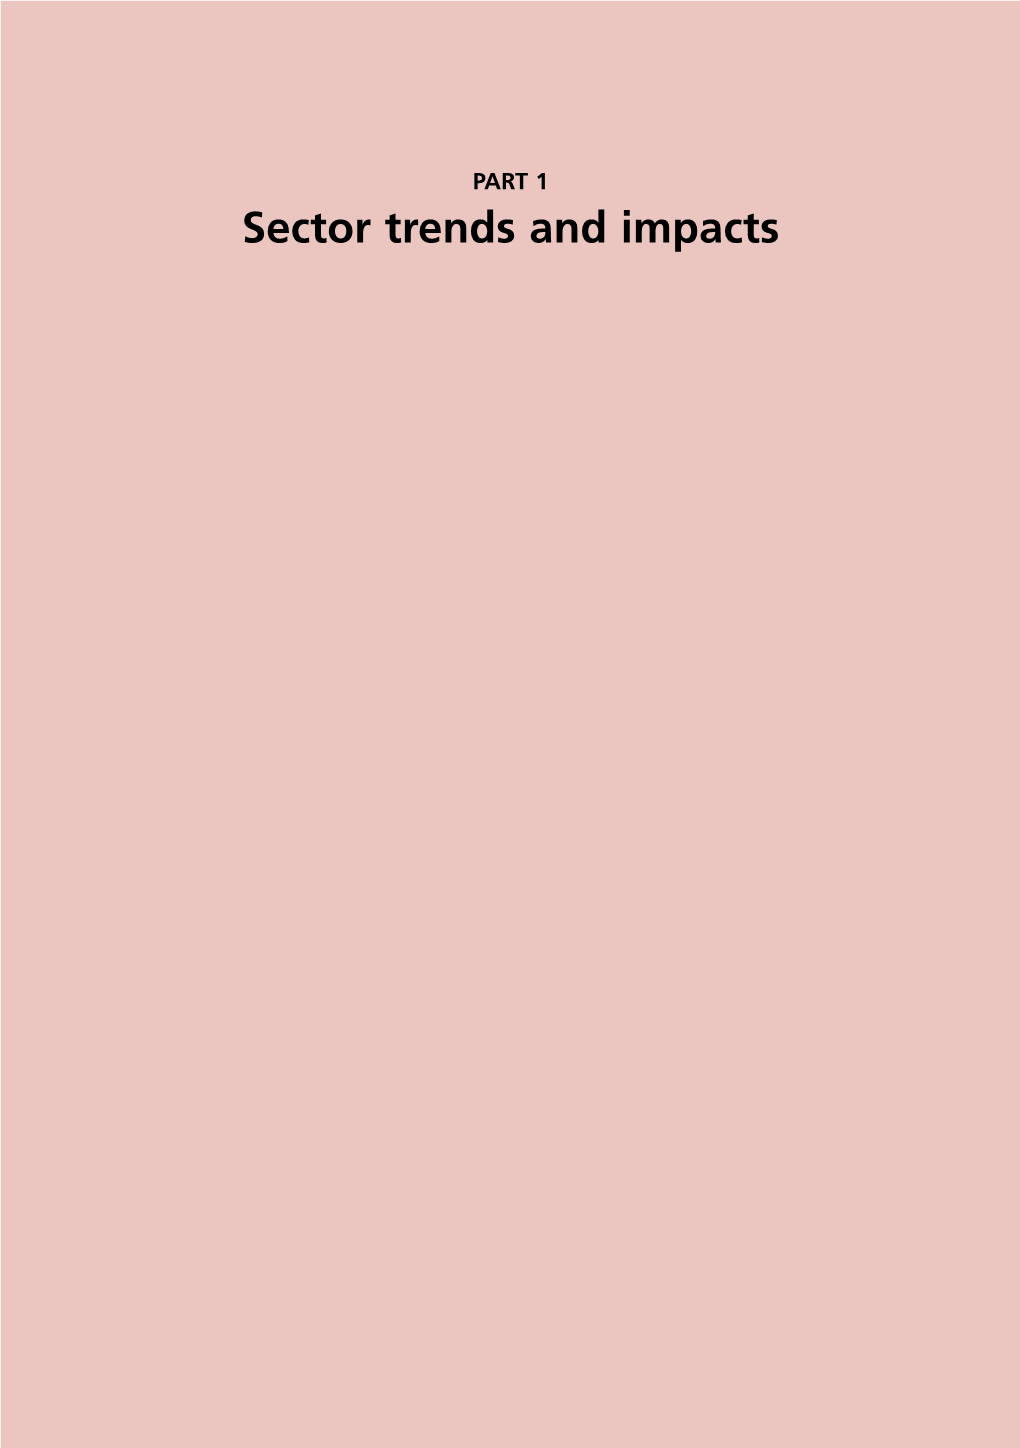 Global Poultry Sector Trends and External Drivers of Structural Change